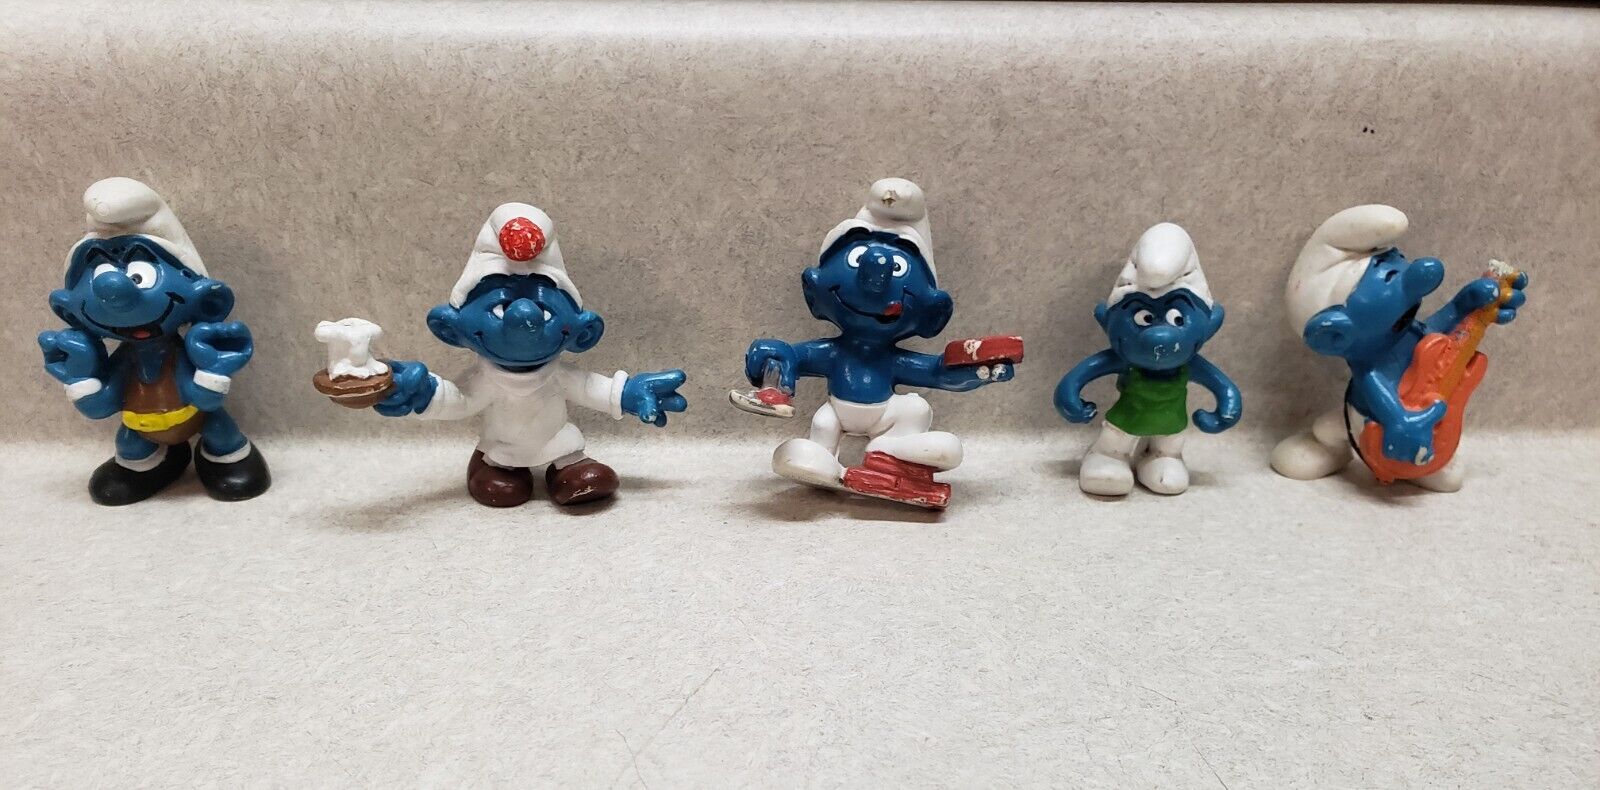 Lot 1980s Vintage Smurf collectible figures all as is